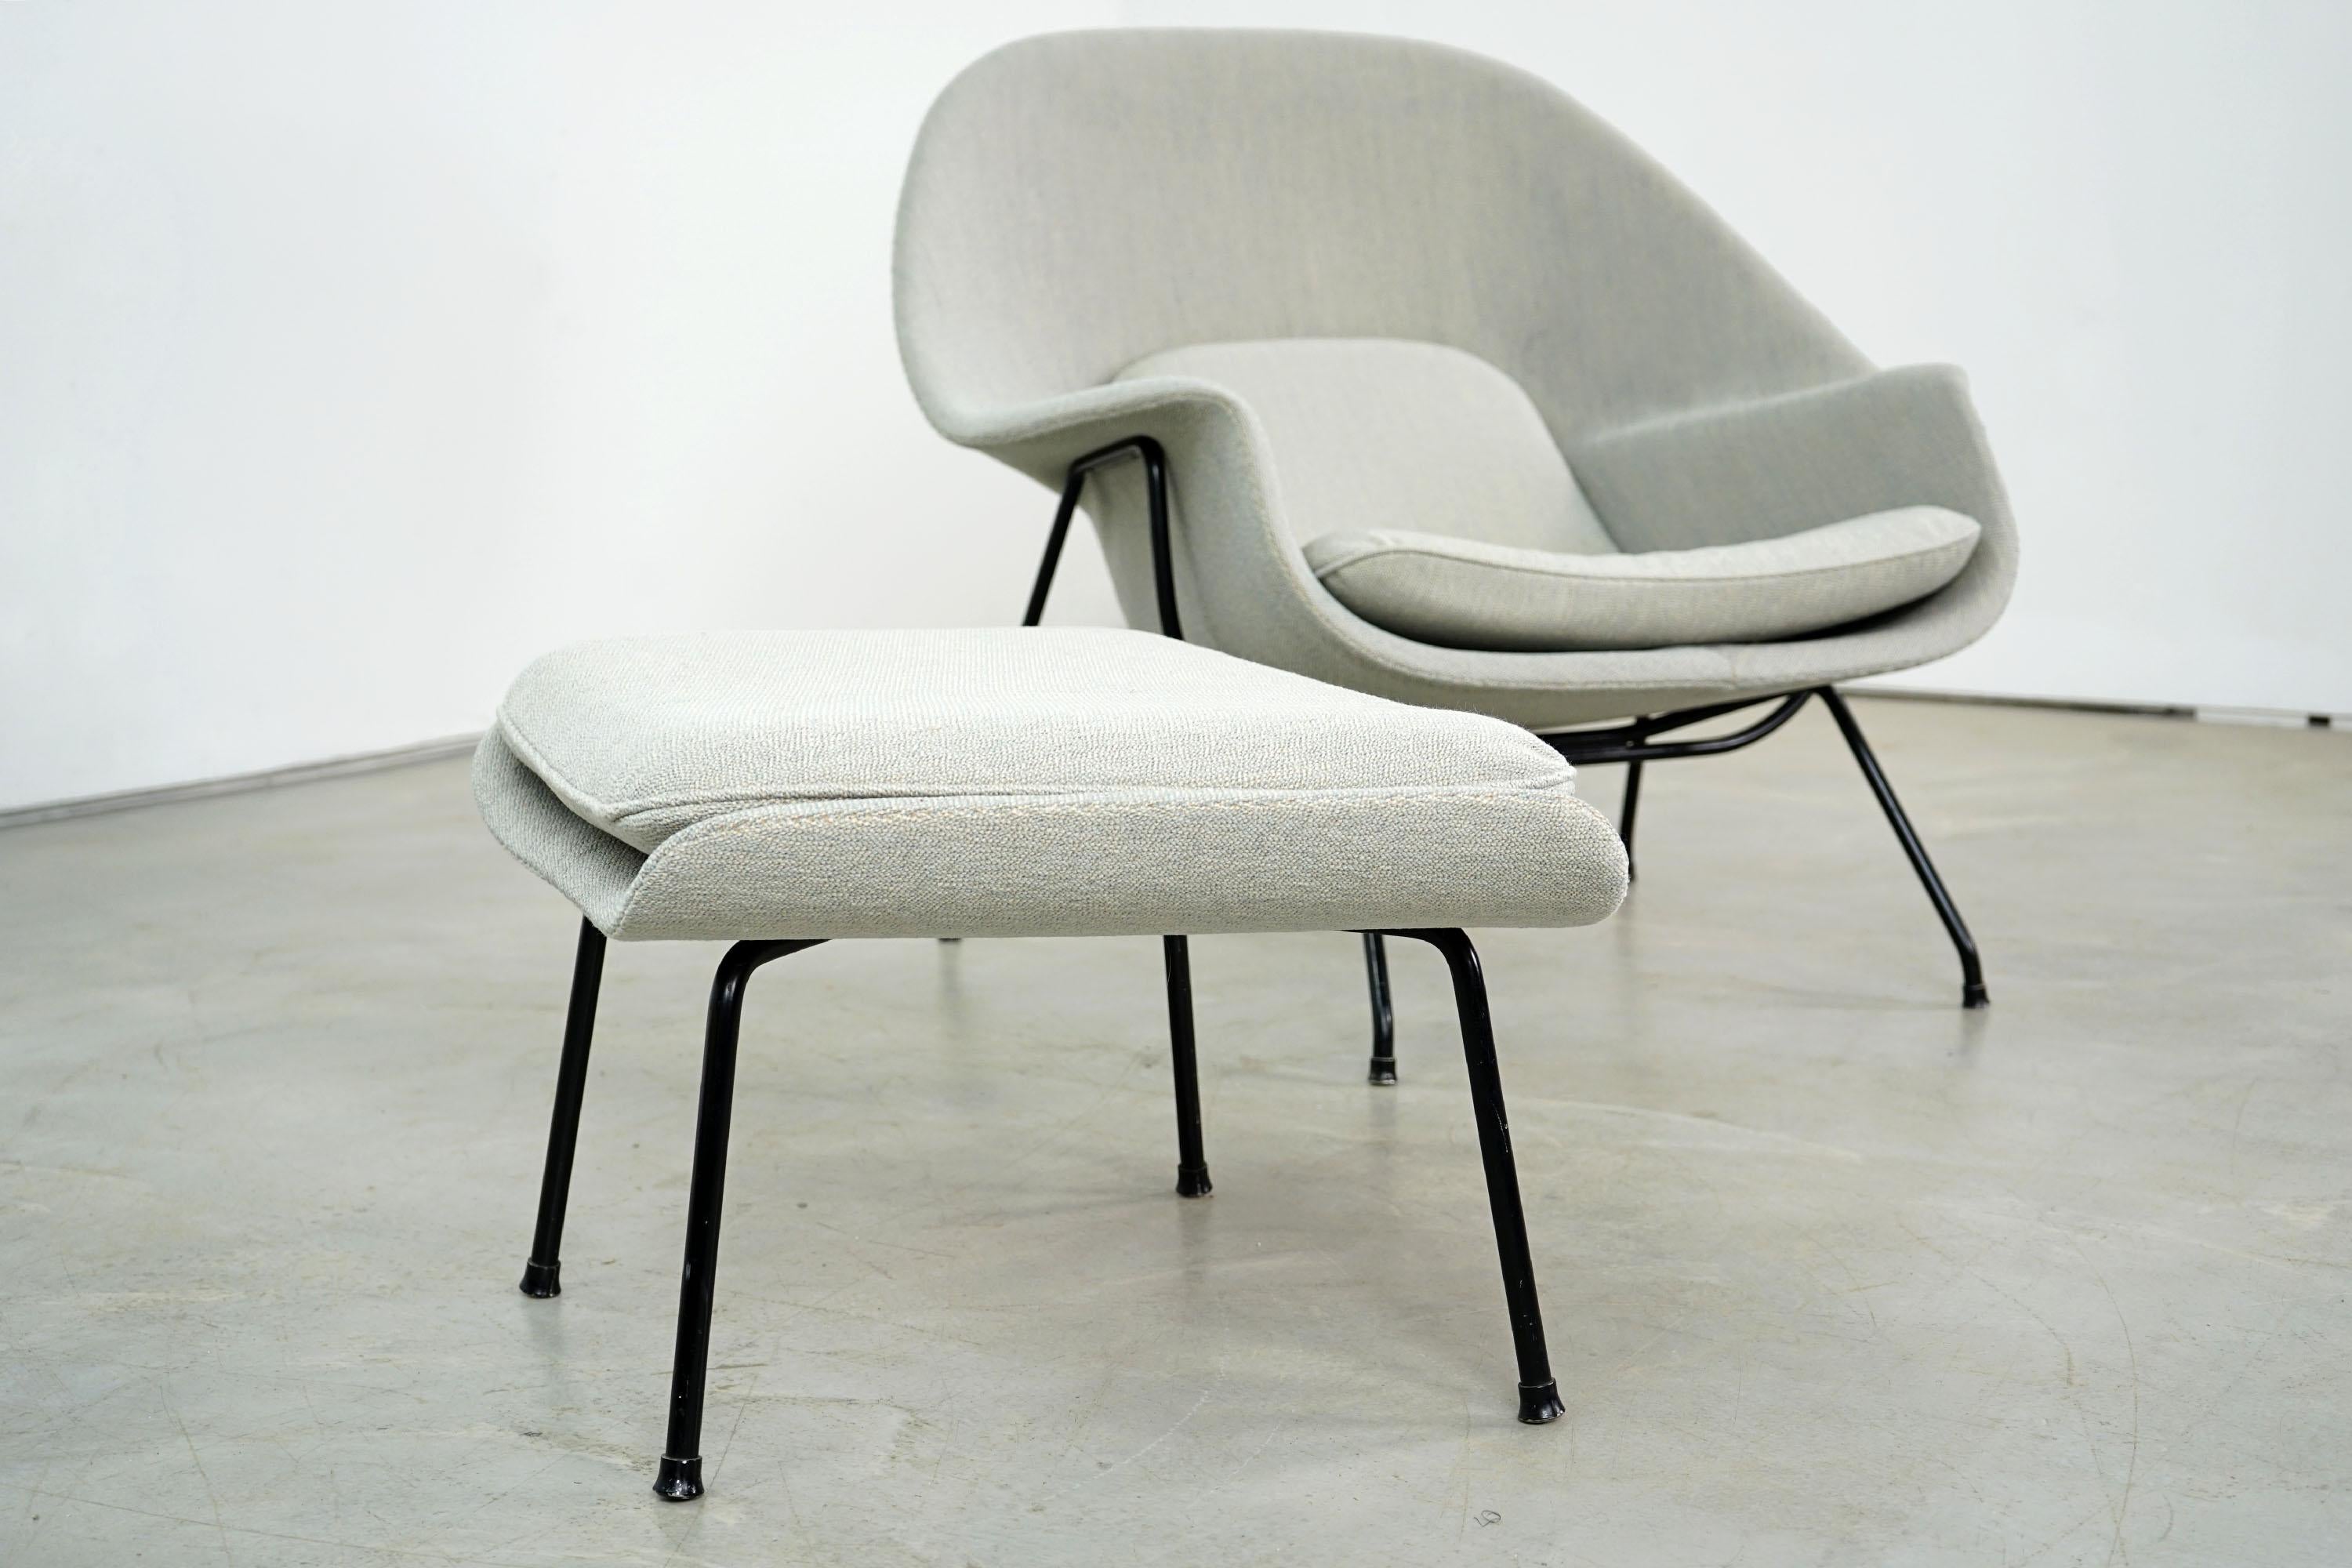 Mid-20th Century Womb Chair and Ottoman by Eero Saarinen for Knoll International, 1960s For Sale